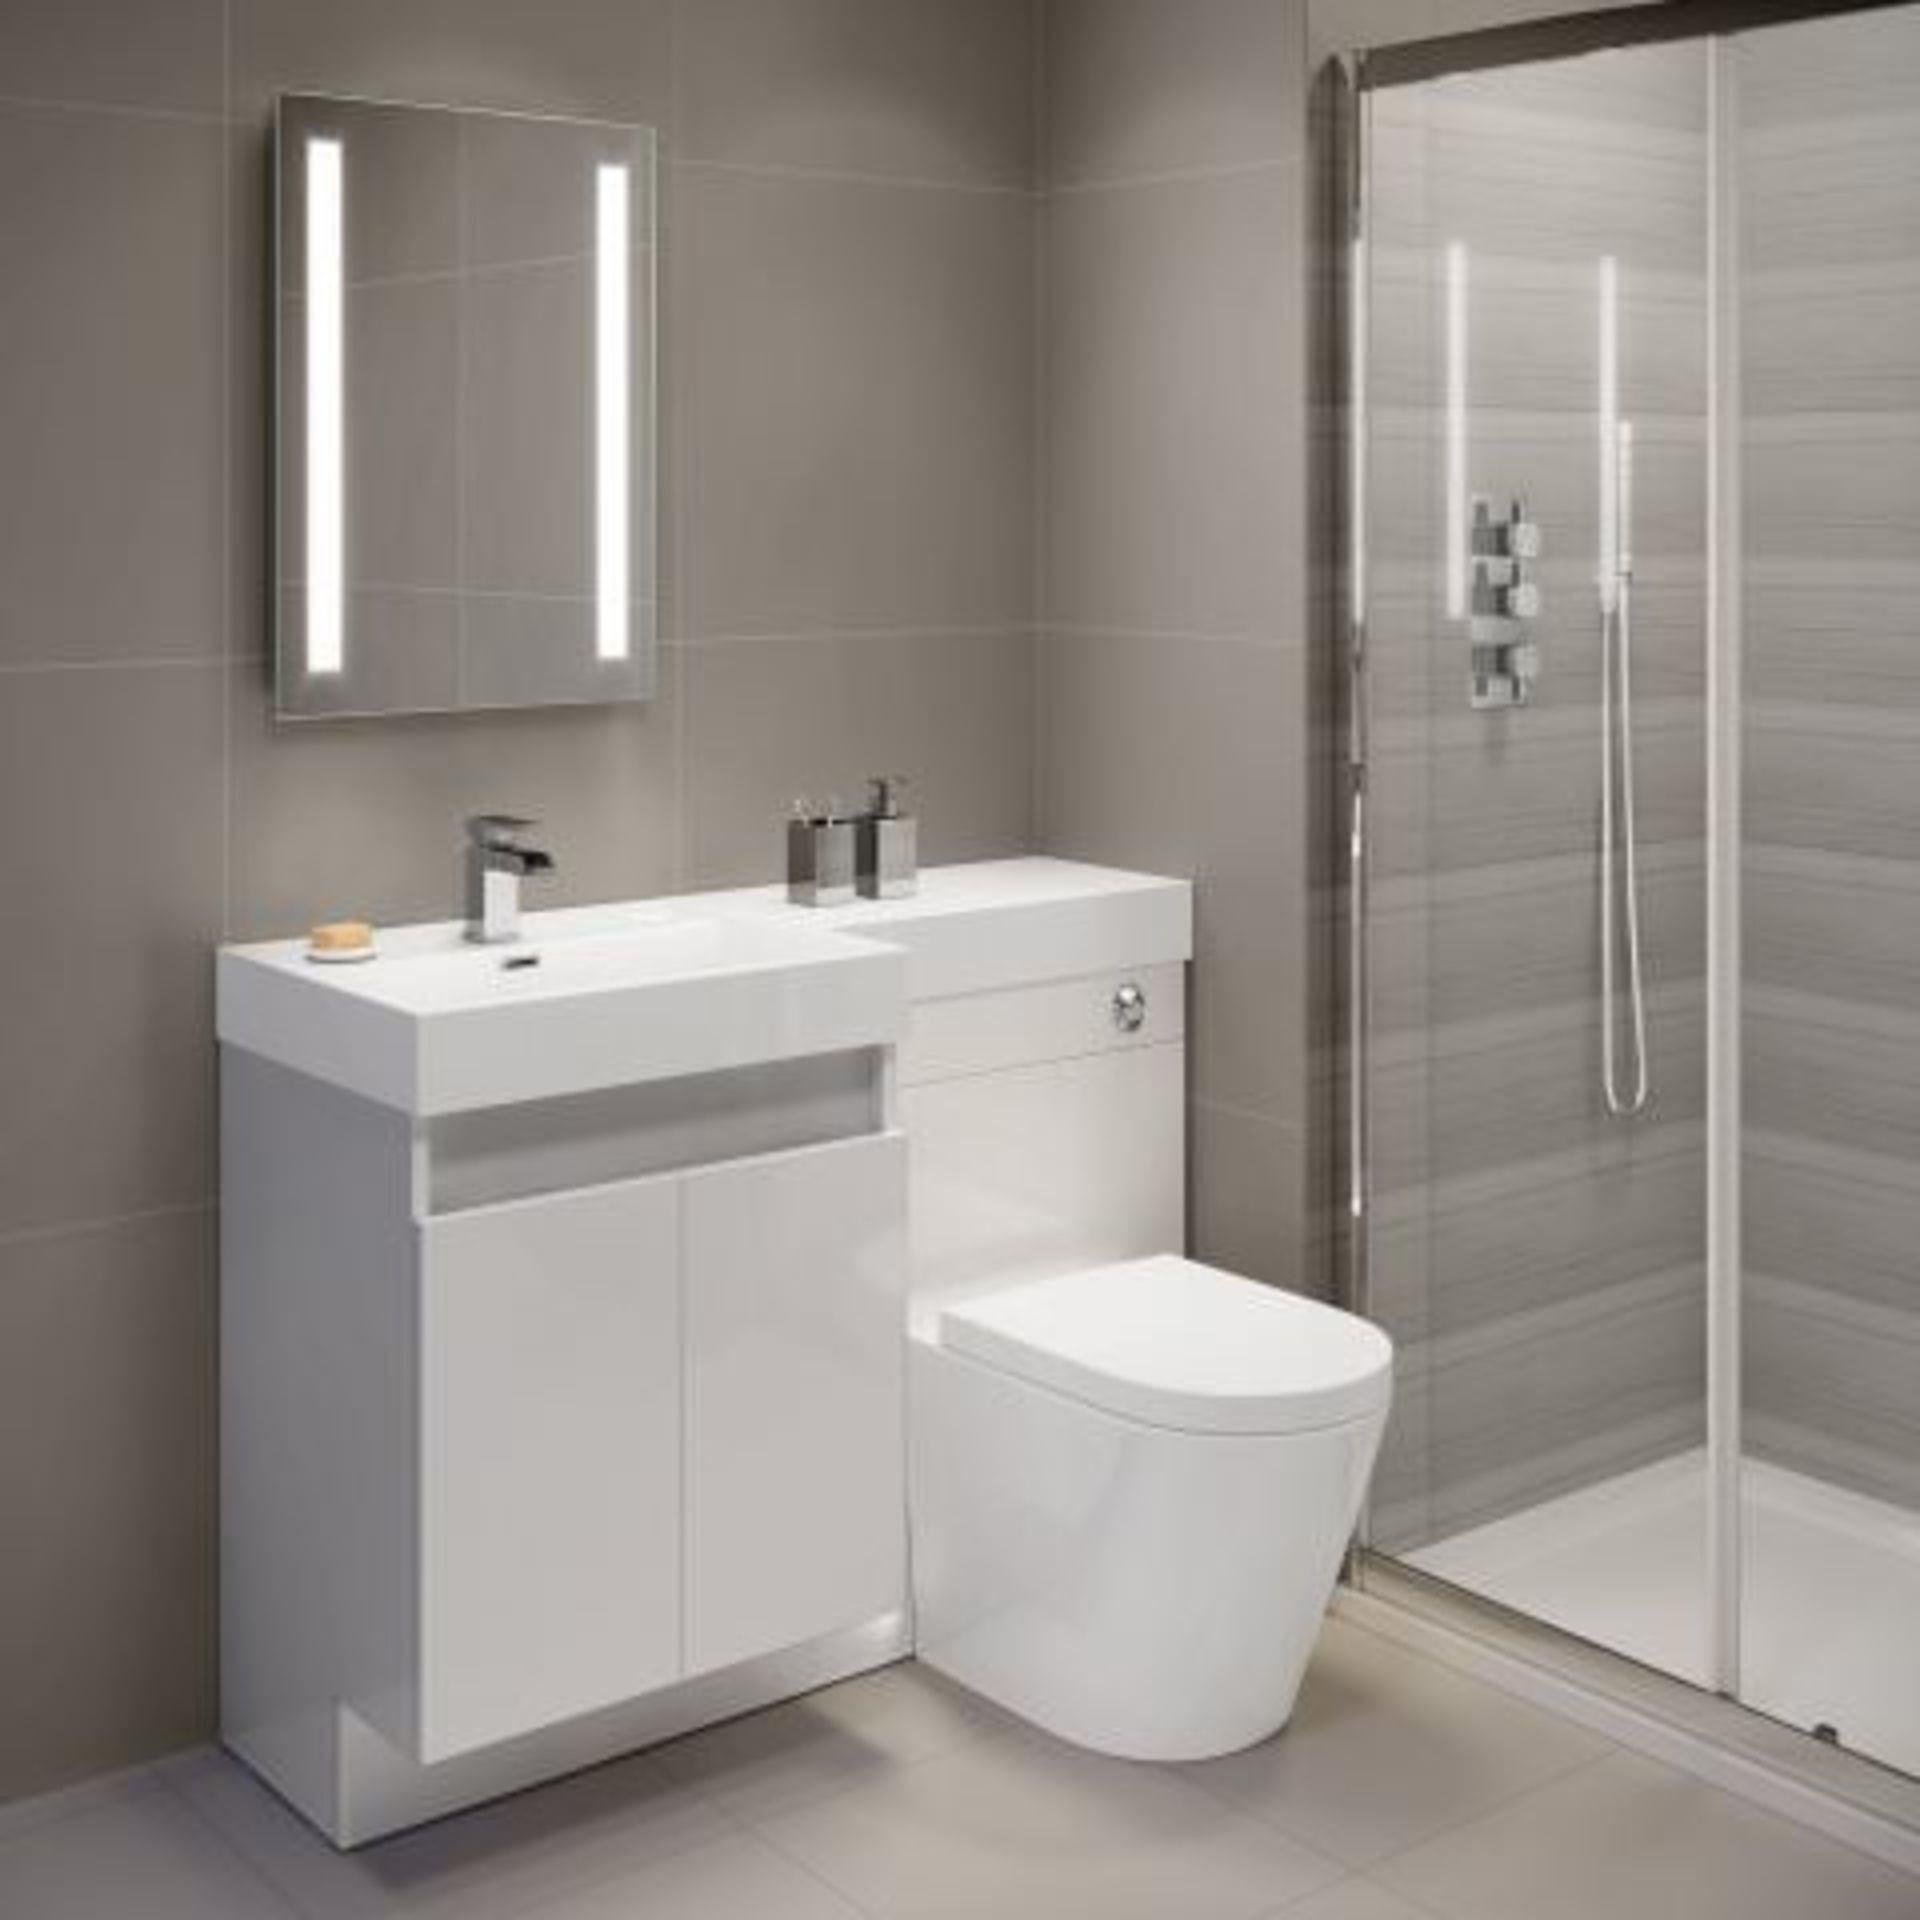 (H215) 500x700mm Omega LED Mirror - Battery Operated. RRP £249.99. Our ultra-flattering LED - Image 4 of 4